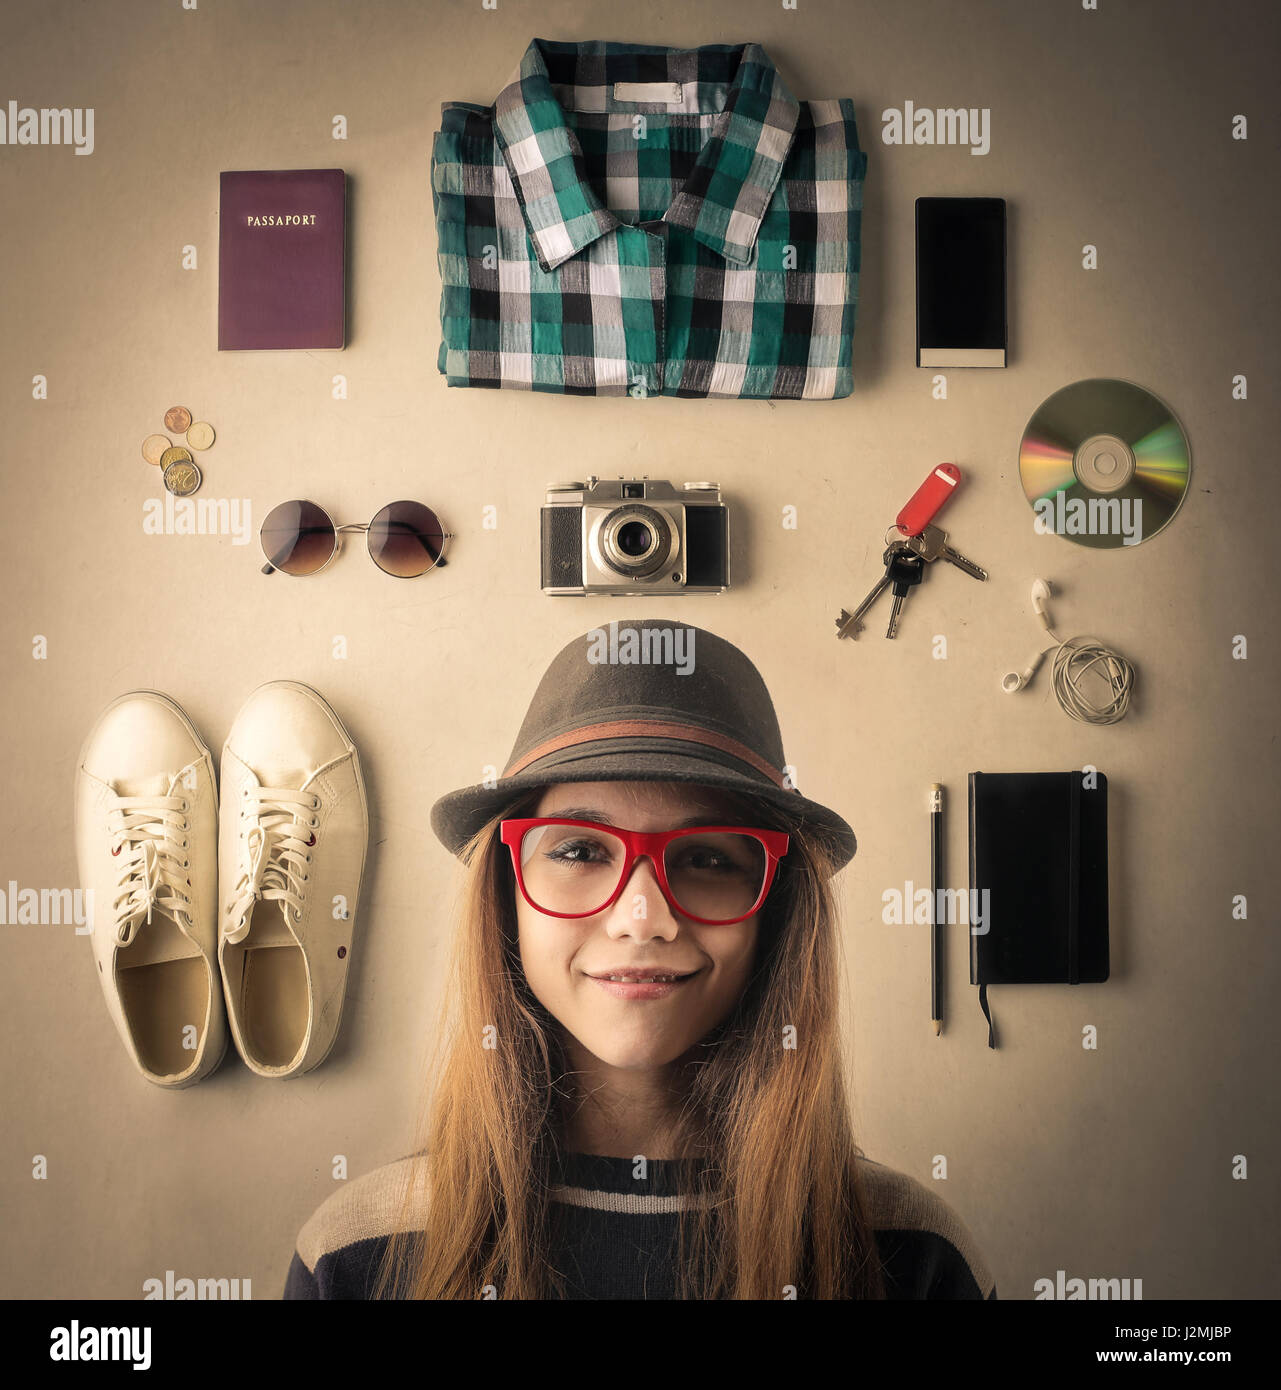 Woman with travel stuff next to her Stock Photo